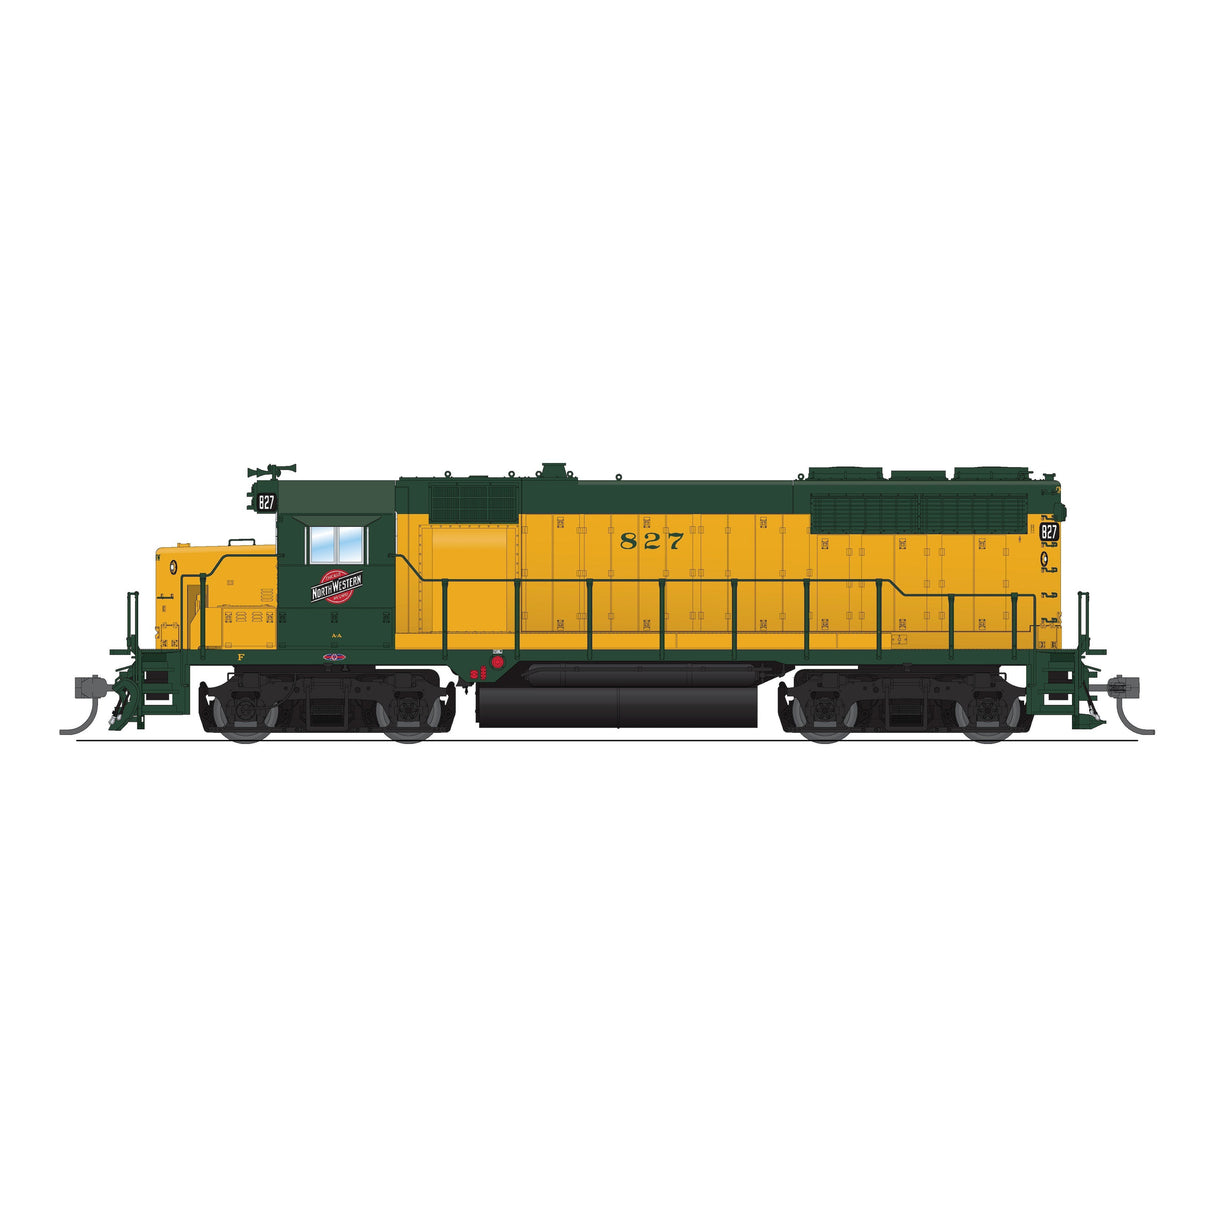 Broadway Limited HO Scale EMD GP35 CNW 840 Green & Yellow Paragon4 Sound/DC/DCC HO